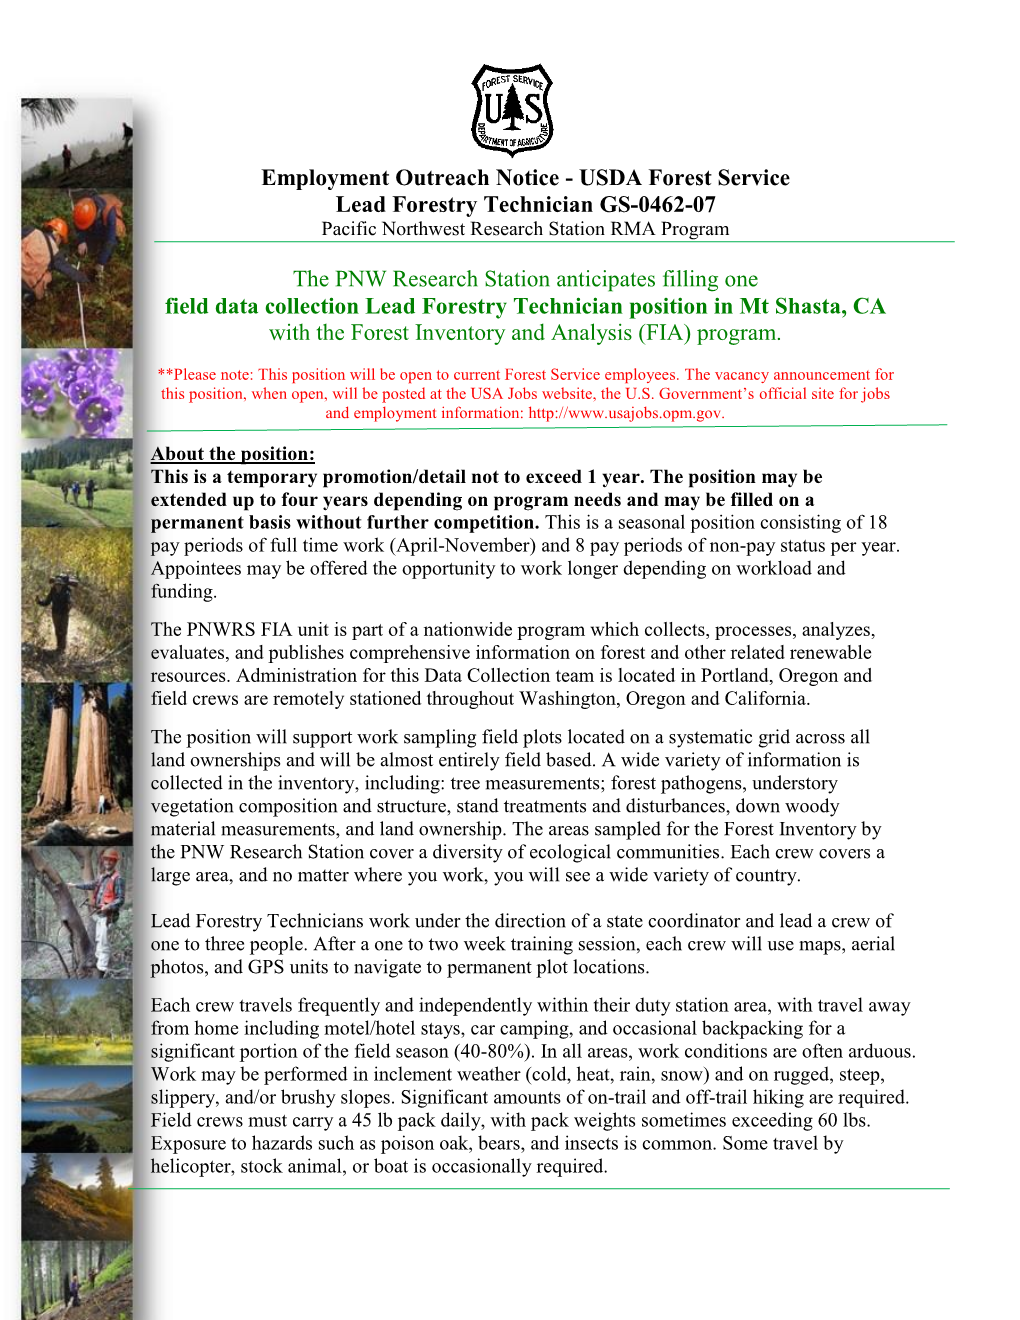 Employment Outreach Notice - USDA Forest Service Lead Forestry Technician GS-0462-07 Pacific Northwest Research Station RMA Program